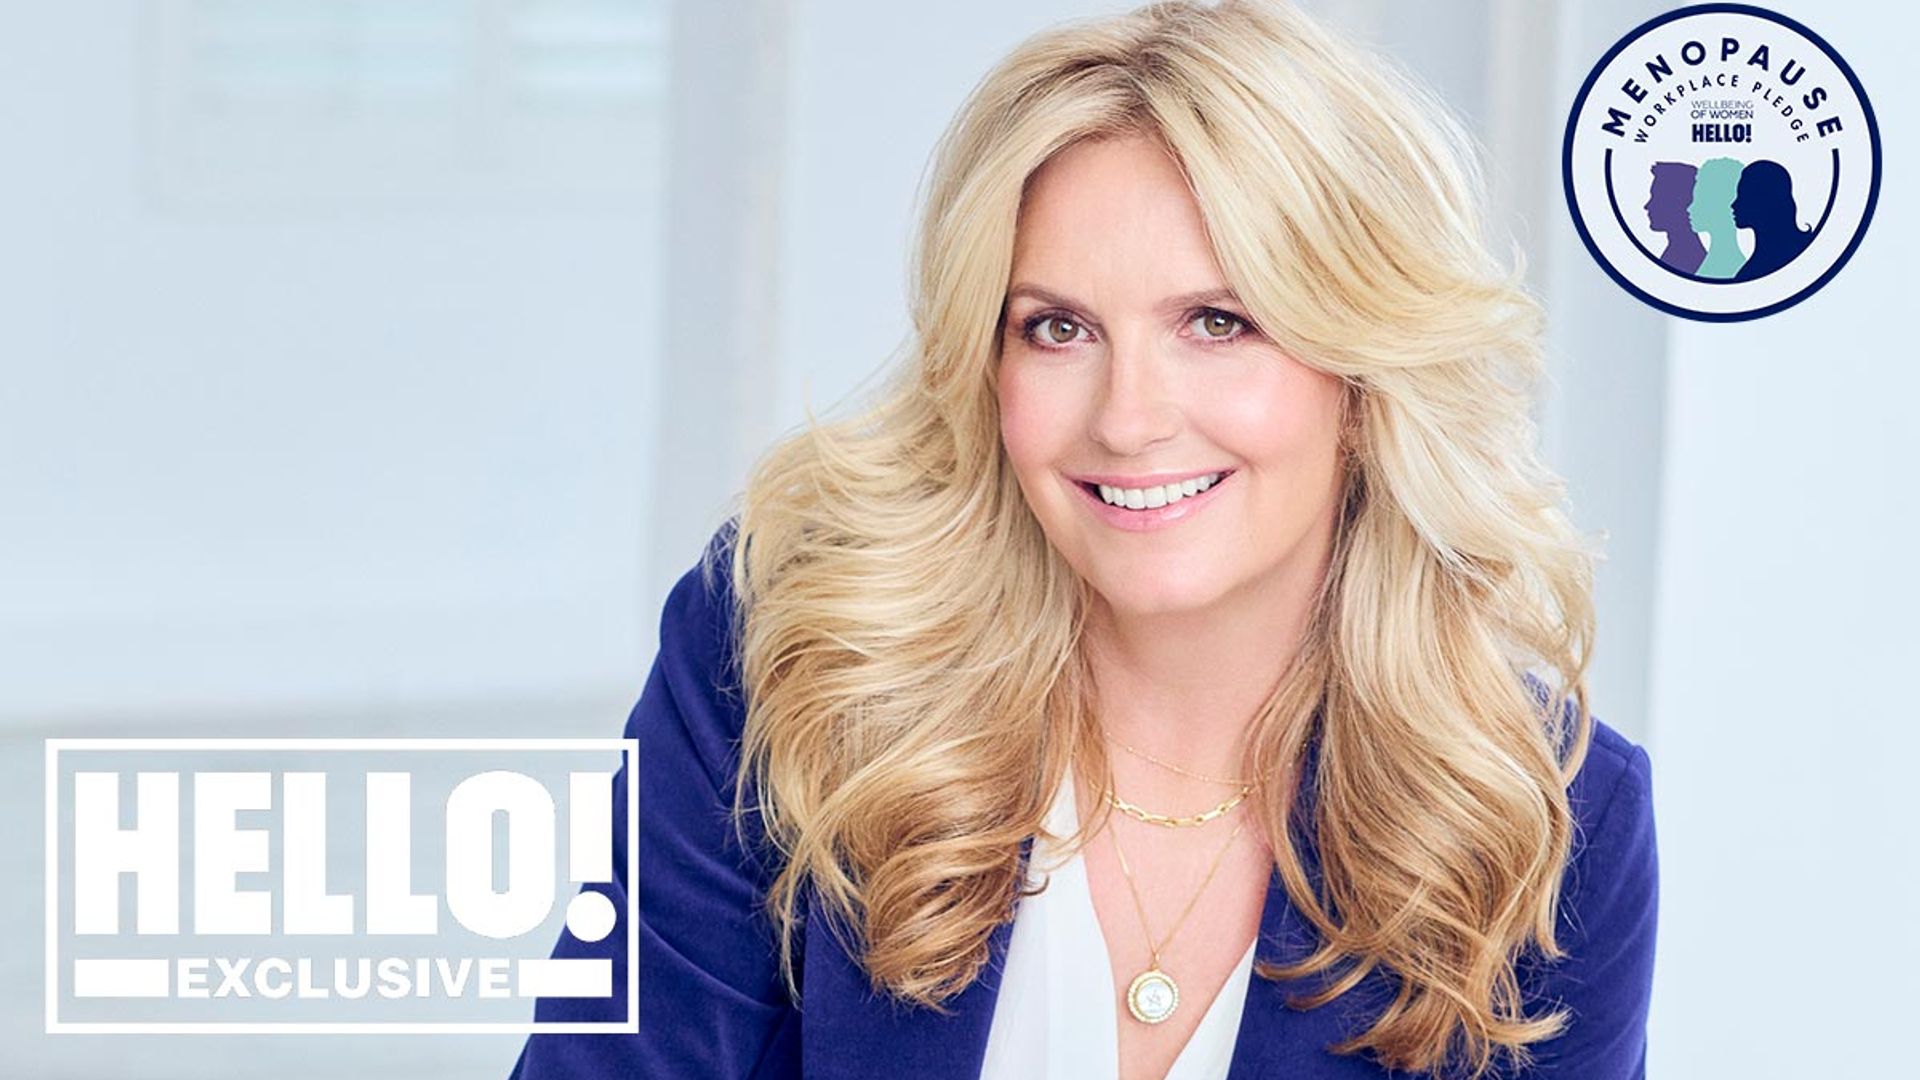 Exclusive: Penny Lancaster shares her personal menopause experience - 'Rod was worried for me'